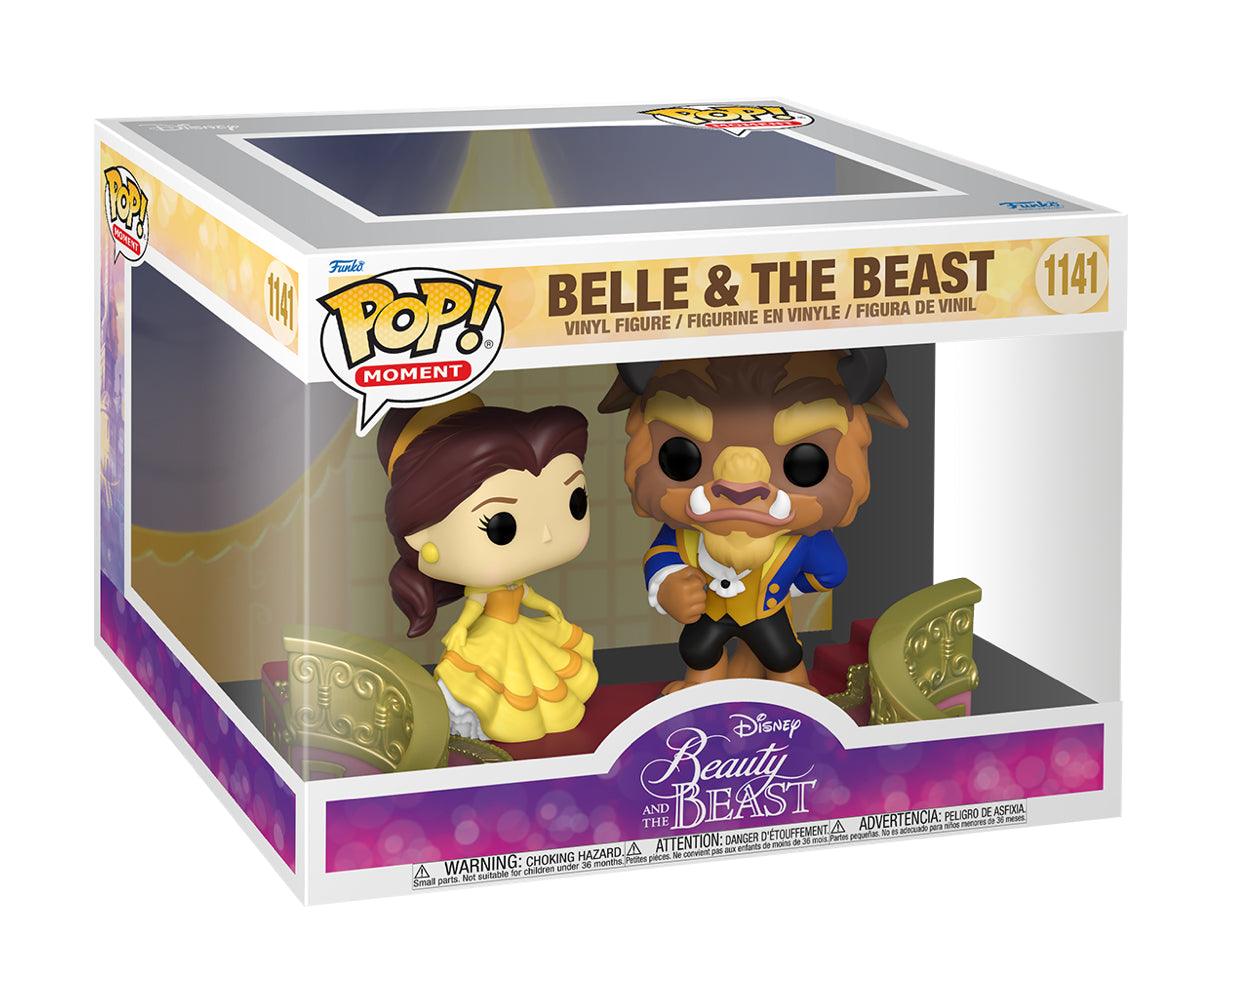 Pop! Moment - Disney - Belle & The Beast - Beauty And The Beast - #1141 - Hobby Champion Inc